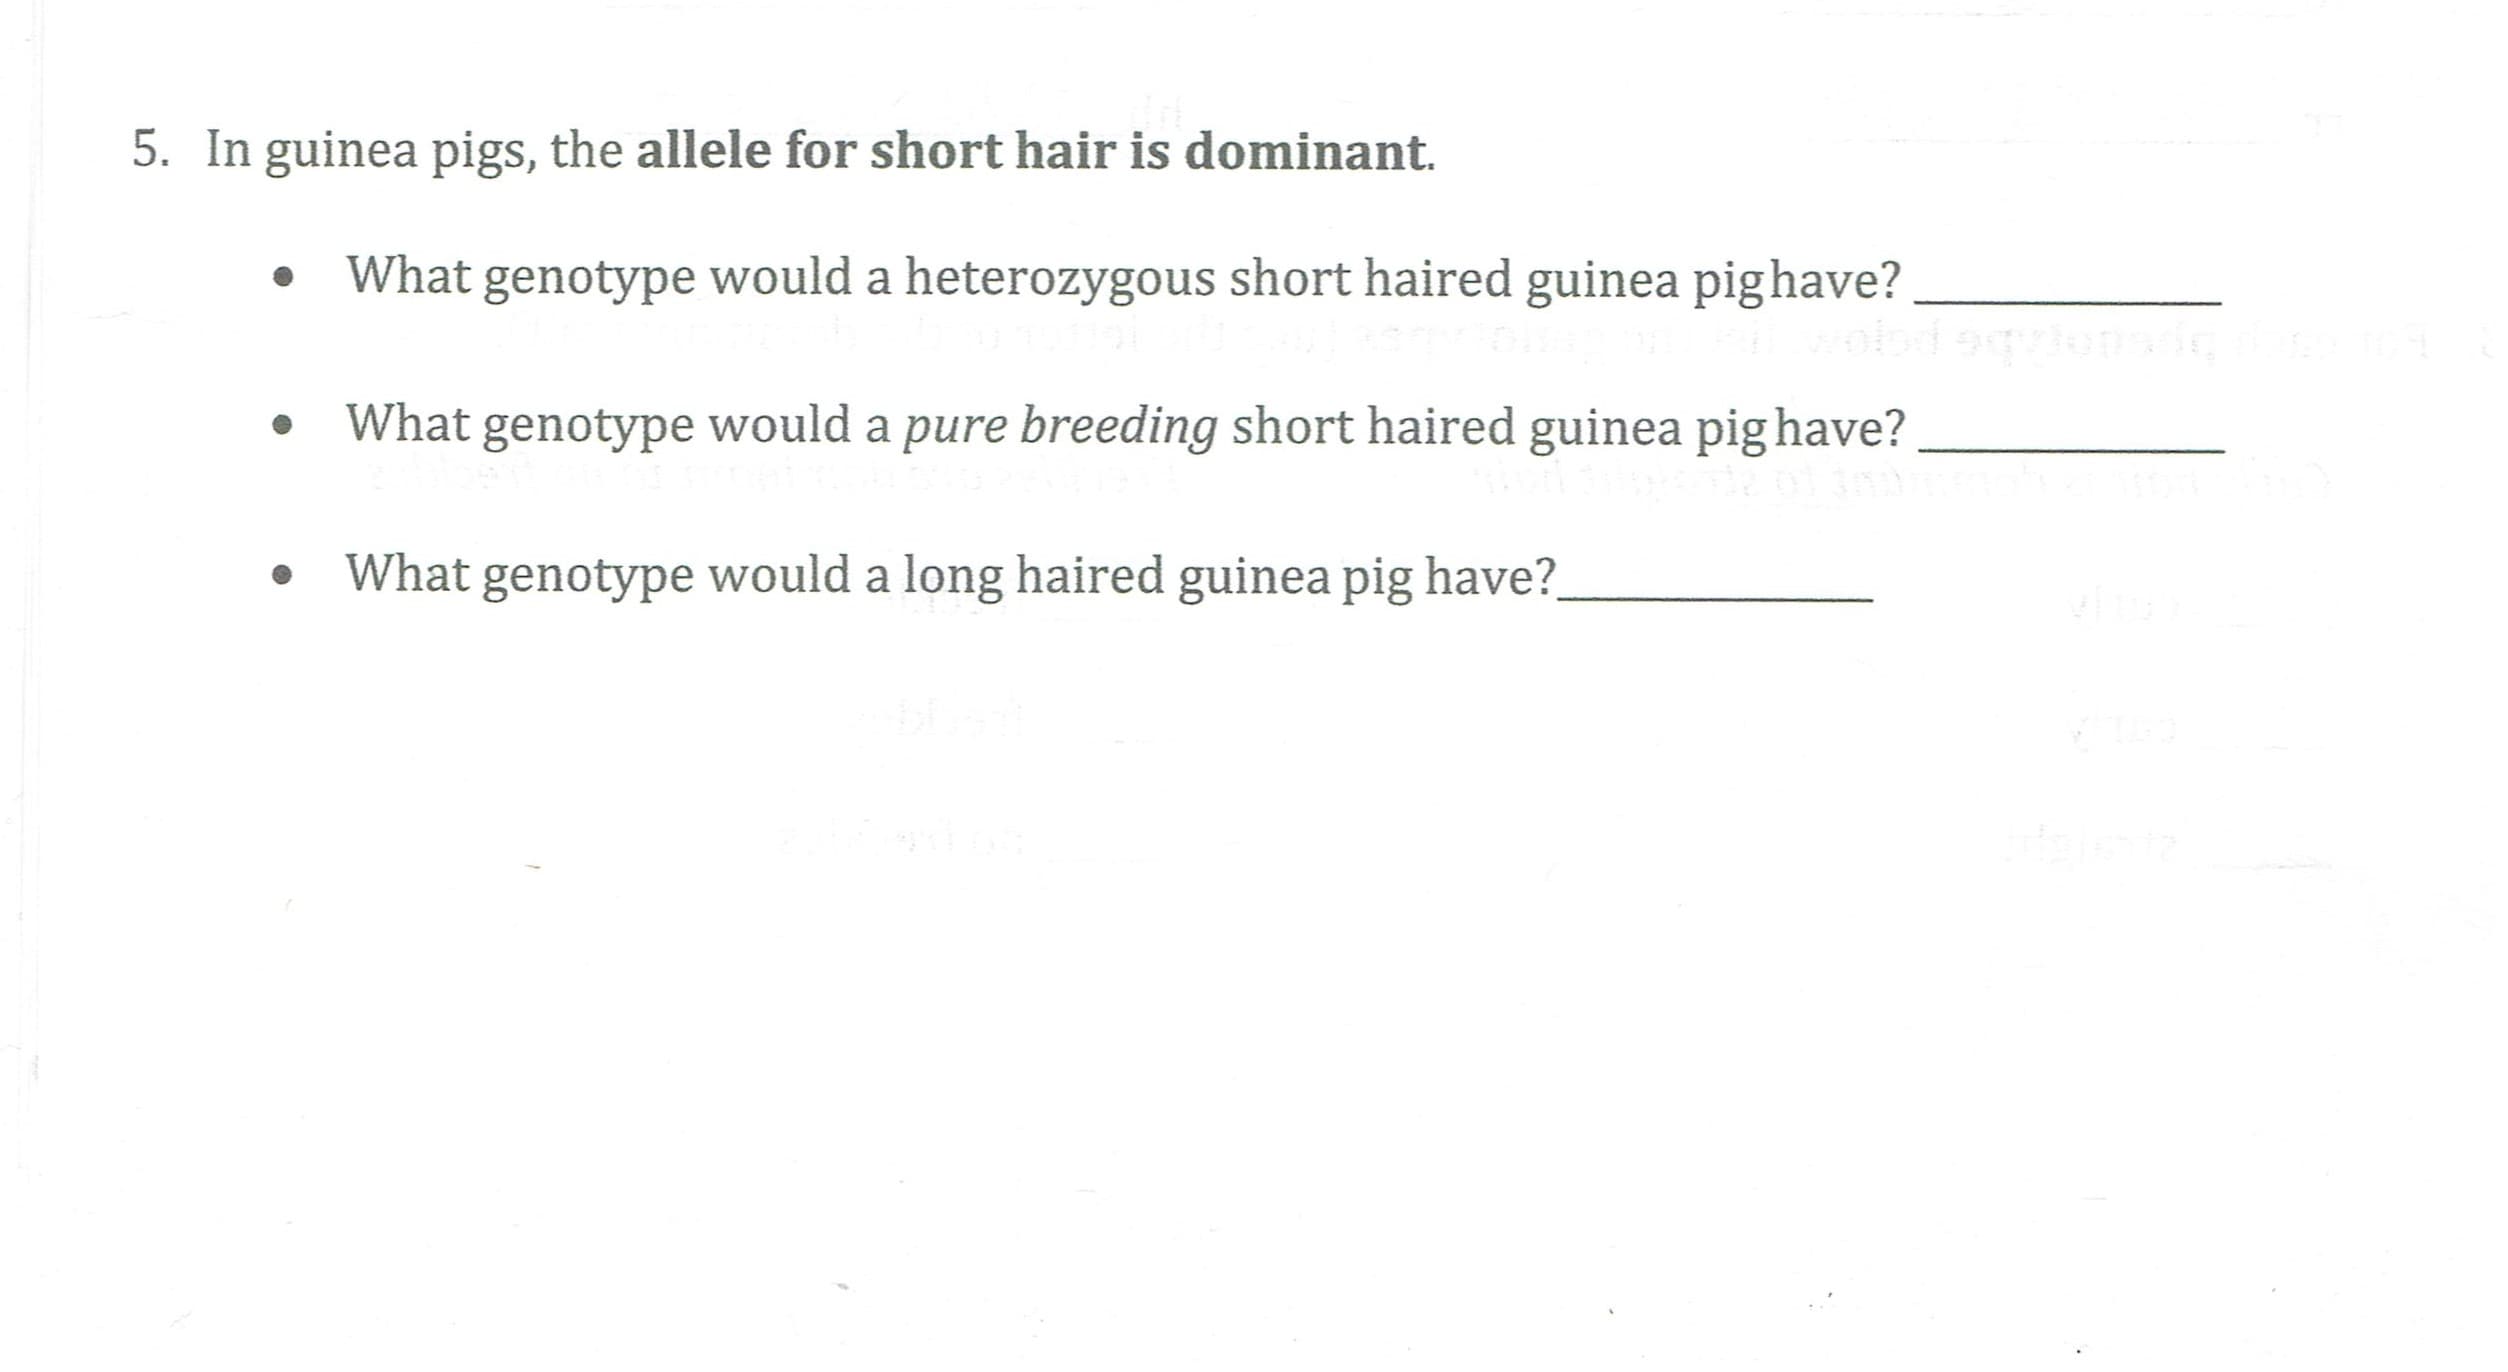 5. In guinea pigs, the allele for short hair is dominant.
What genotype would a heterozygous short haired guinea pighave?
What genotype would a pure breeding short haired guinea pig have?
What genotype would a long haired guinea pig have?
